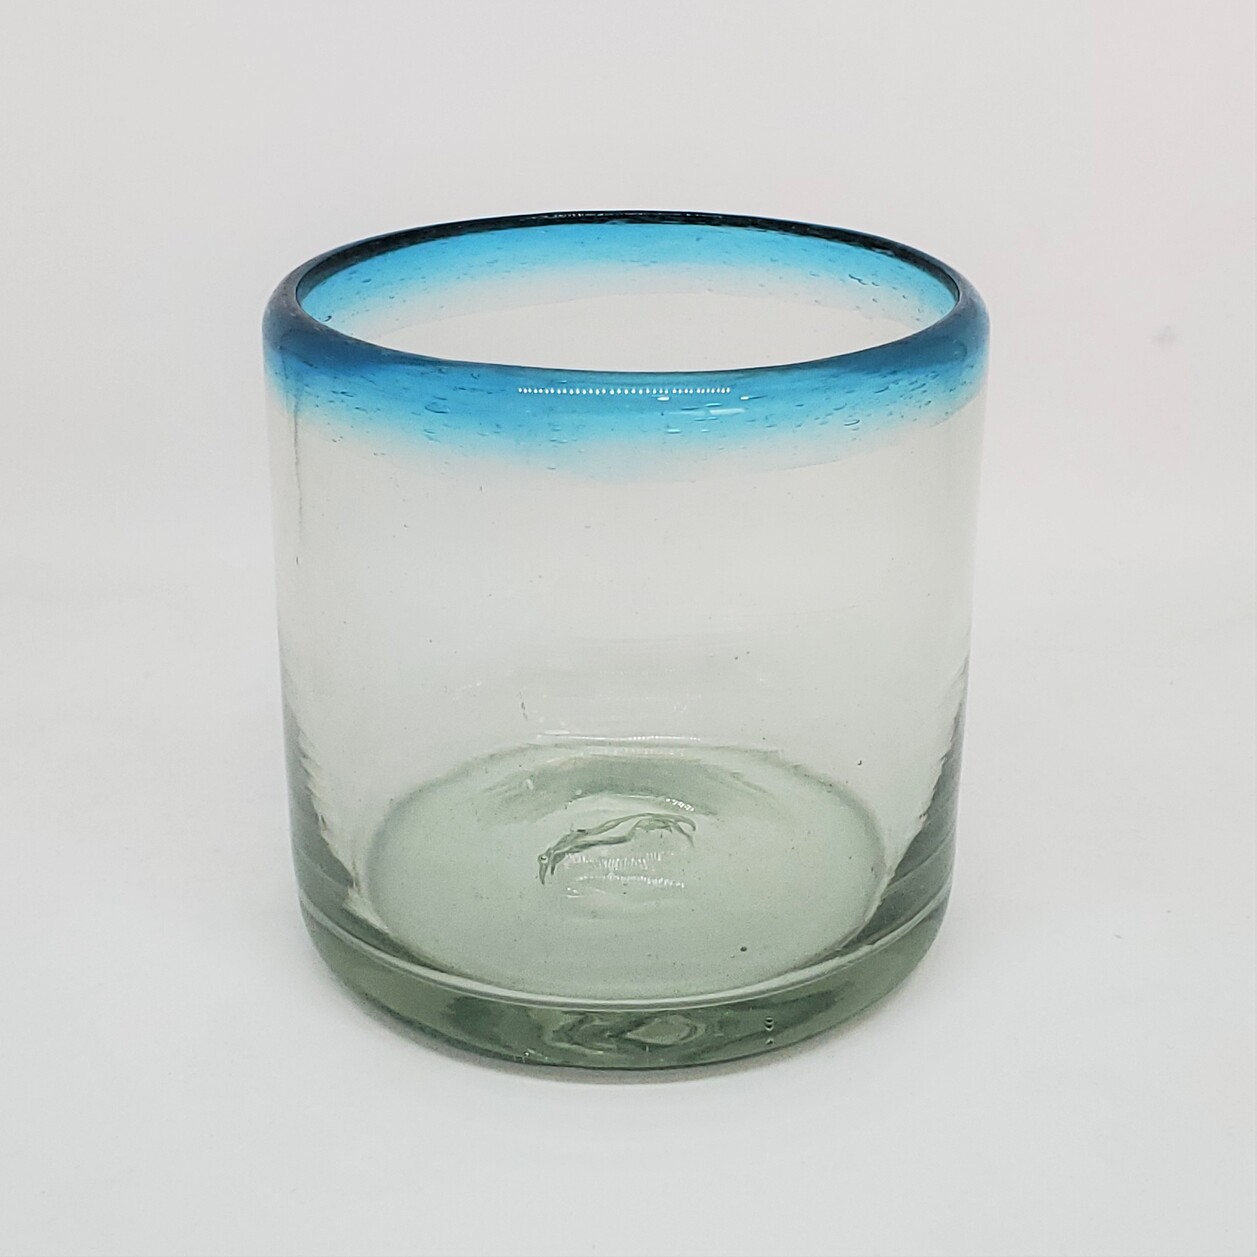 New Items / Aqua Blue Rim 8 oz DOF Rocks Glasses  / These glasses are just the right size to enjoy fresh squeezed fruit juice in the moning.